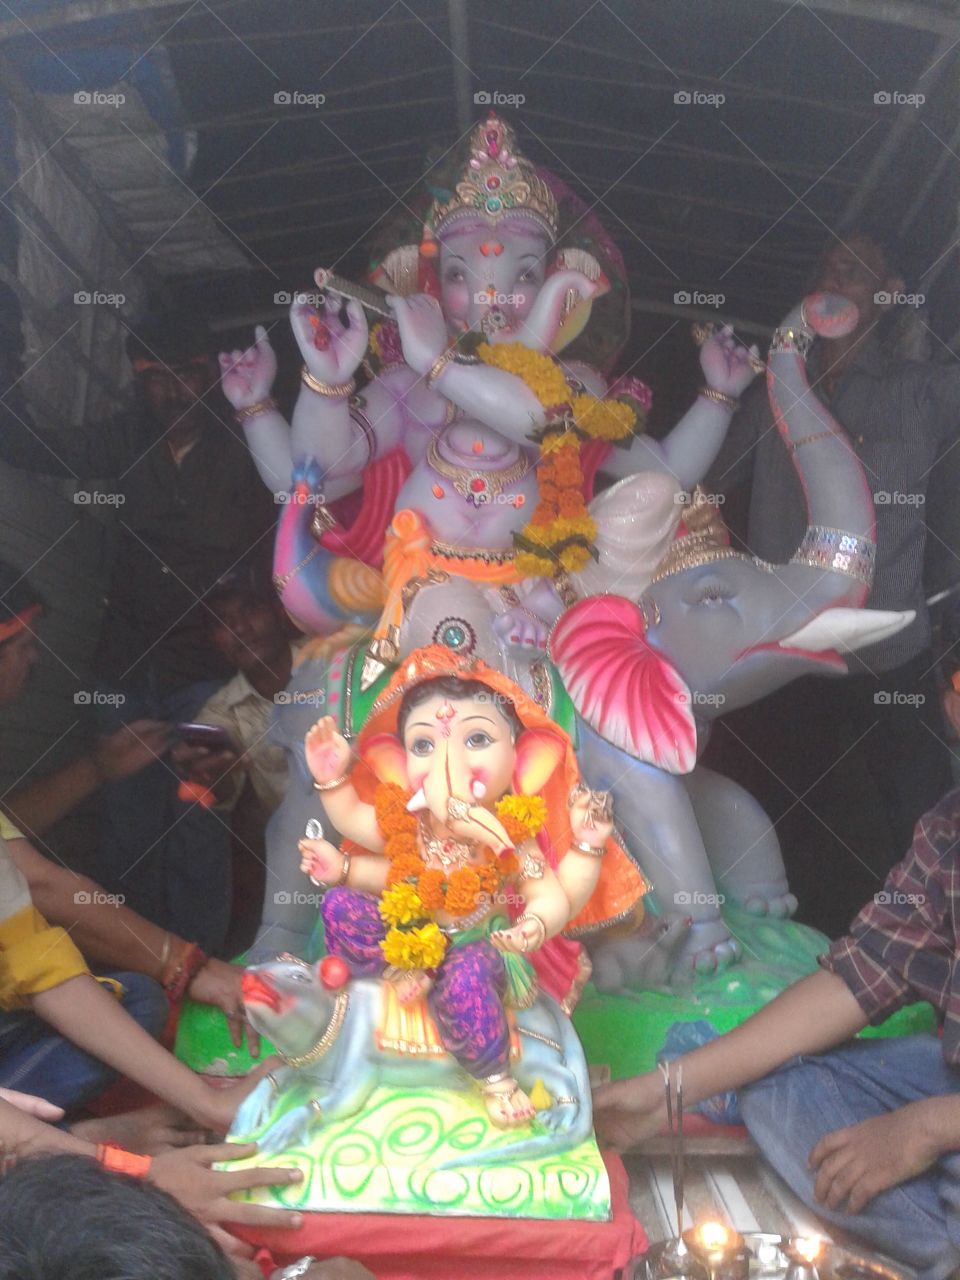 this is statue of Lord Ganesha son of Lord Mahadev Shankar. this festival is very famous in Maharashtra, India.